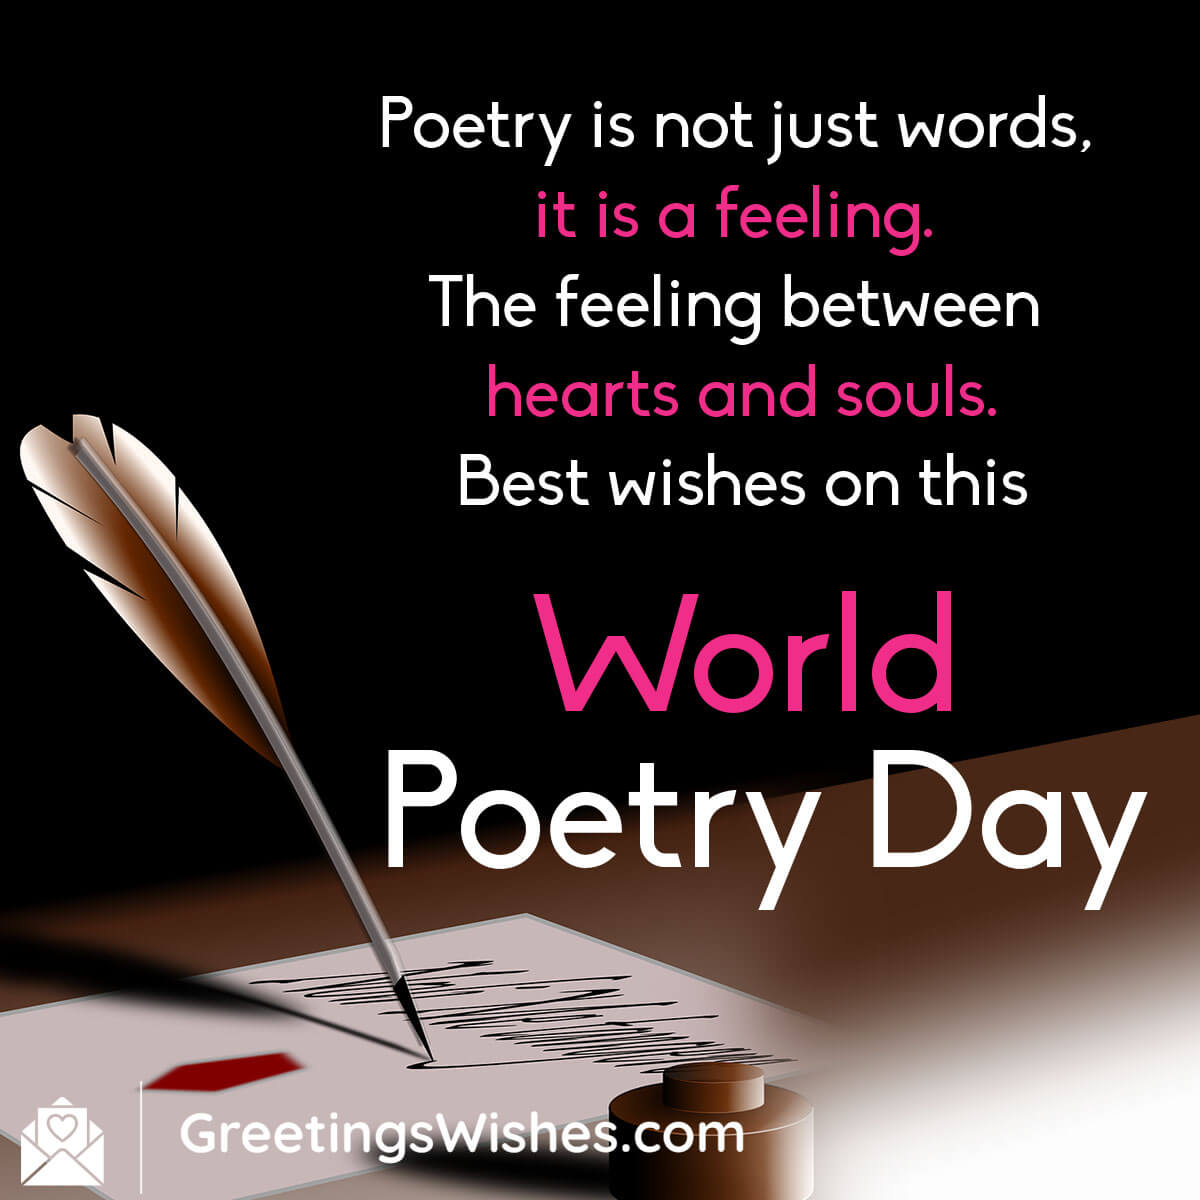 Poetry Day Card